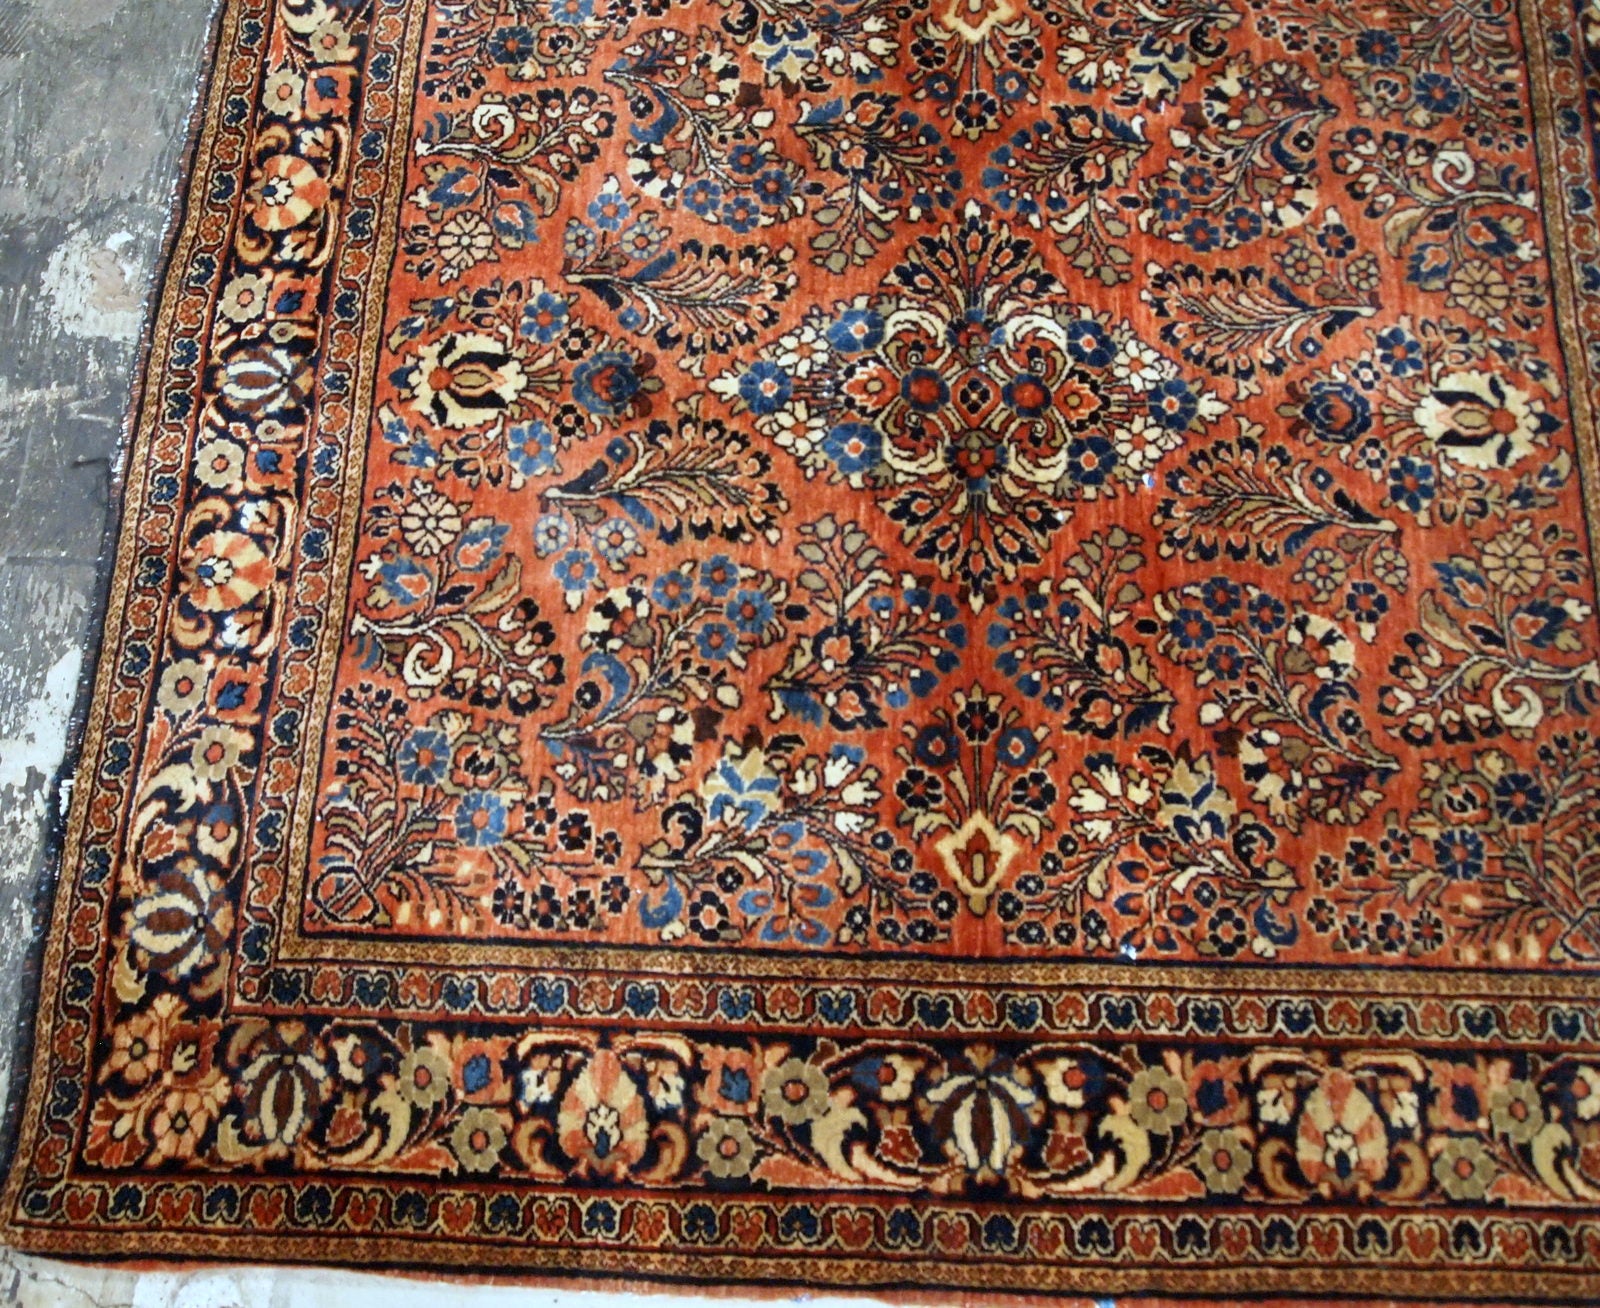 Antique hand-woven Sarouk rug in traditional design and red color. It has been made in the beginning of 20th century and in original good condition.